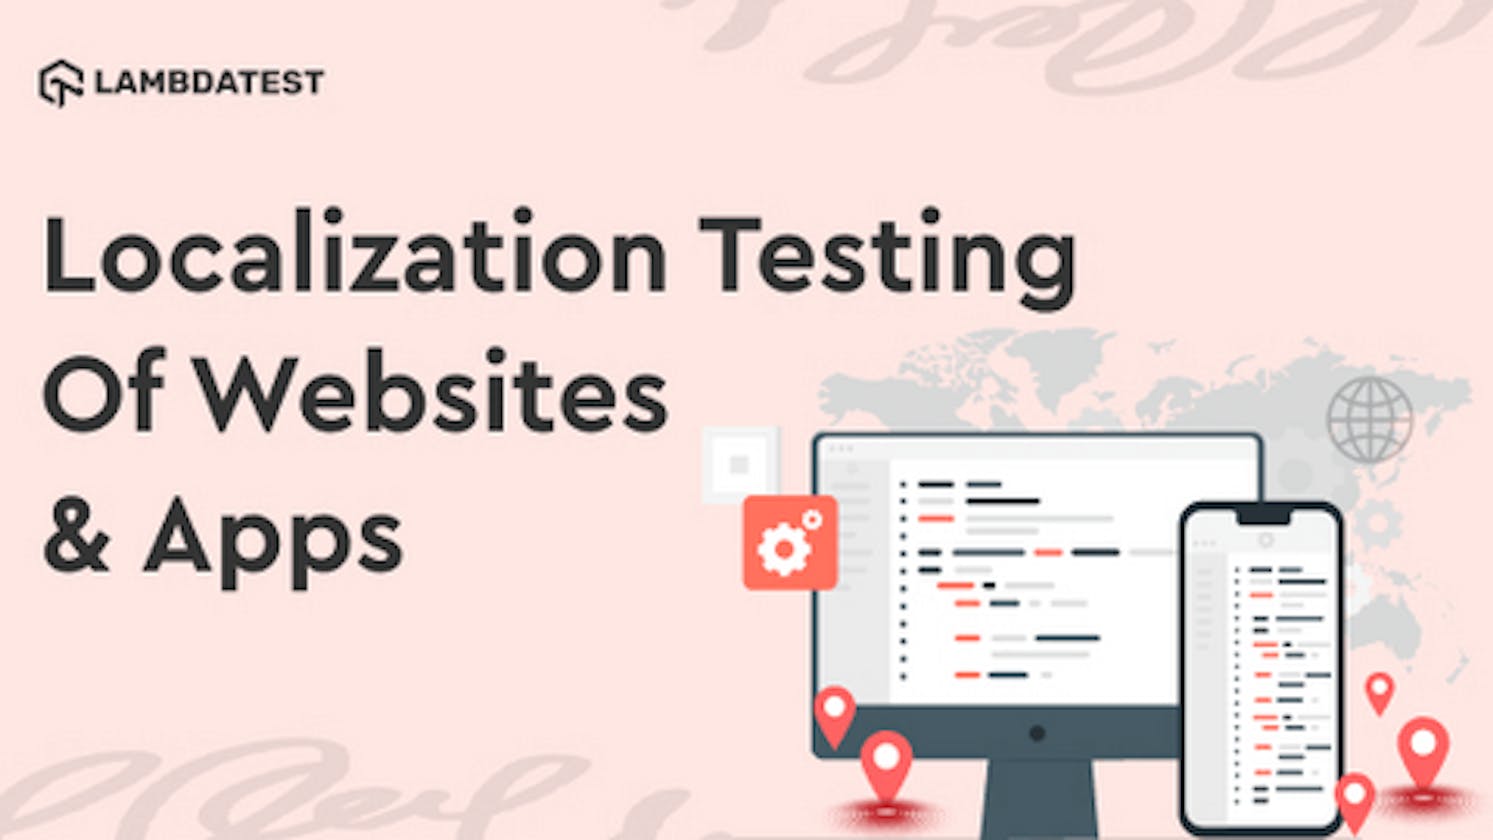 How To Perform Localization Testing Of Websites & Apps?